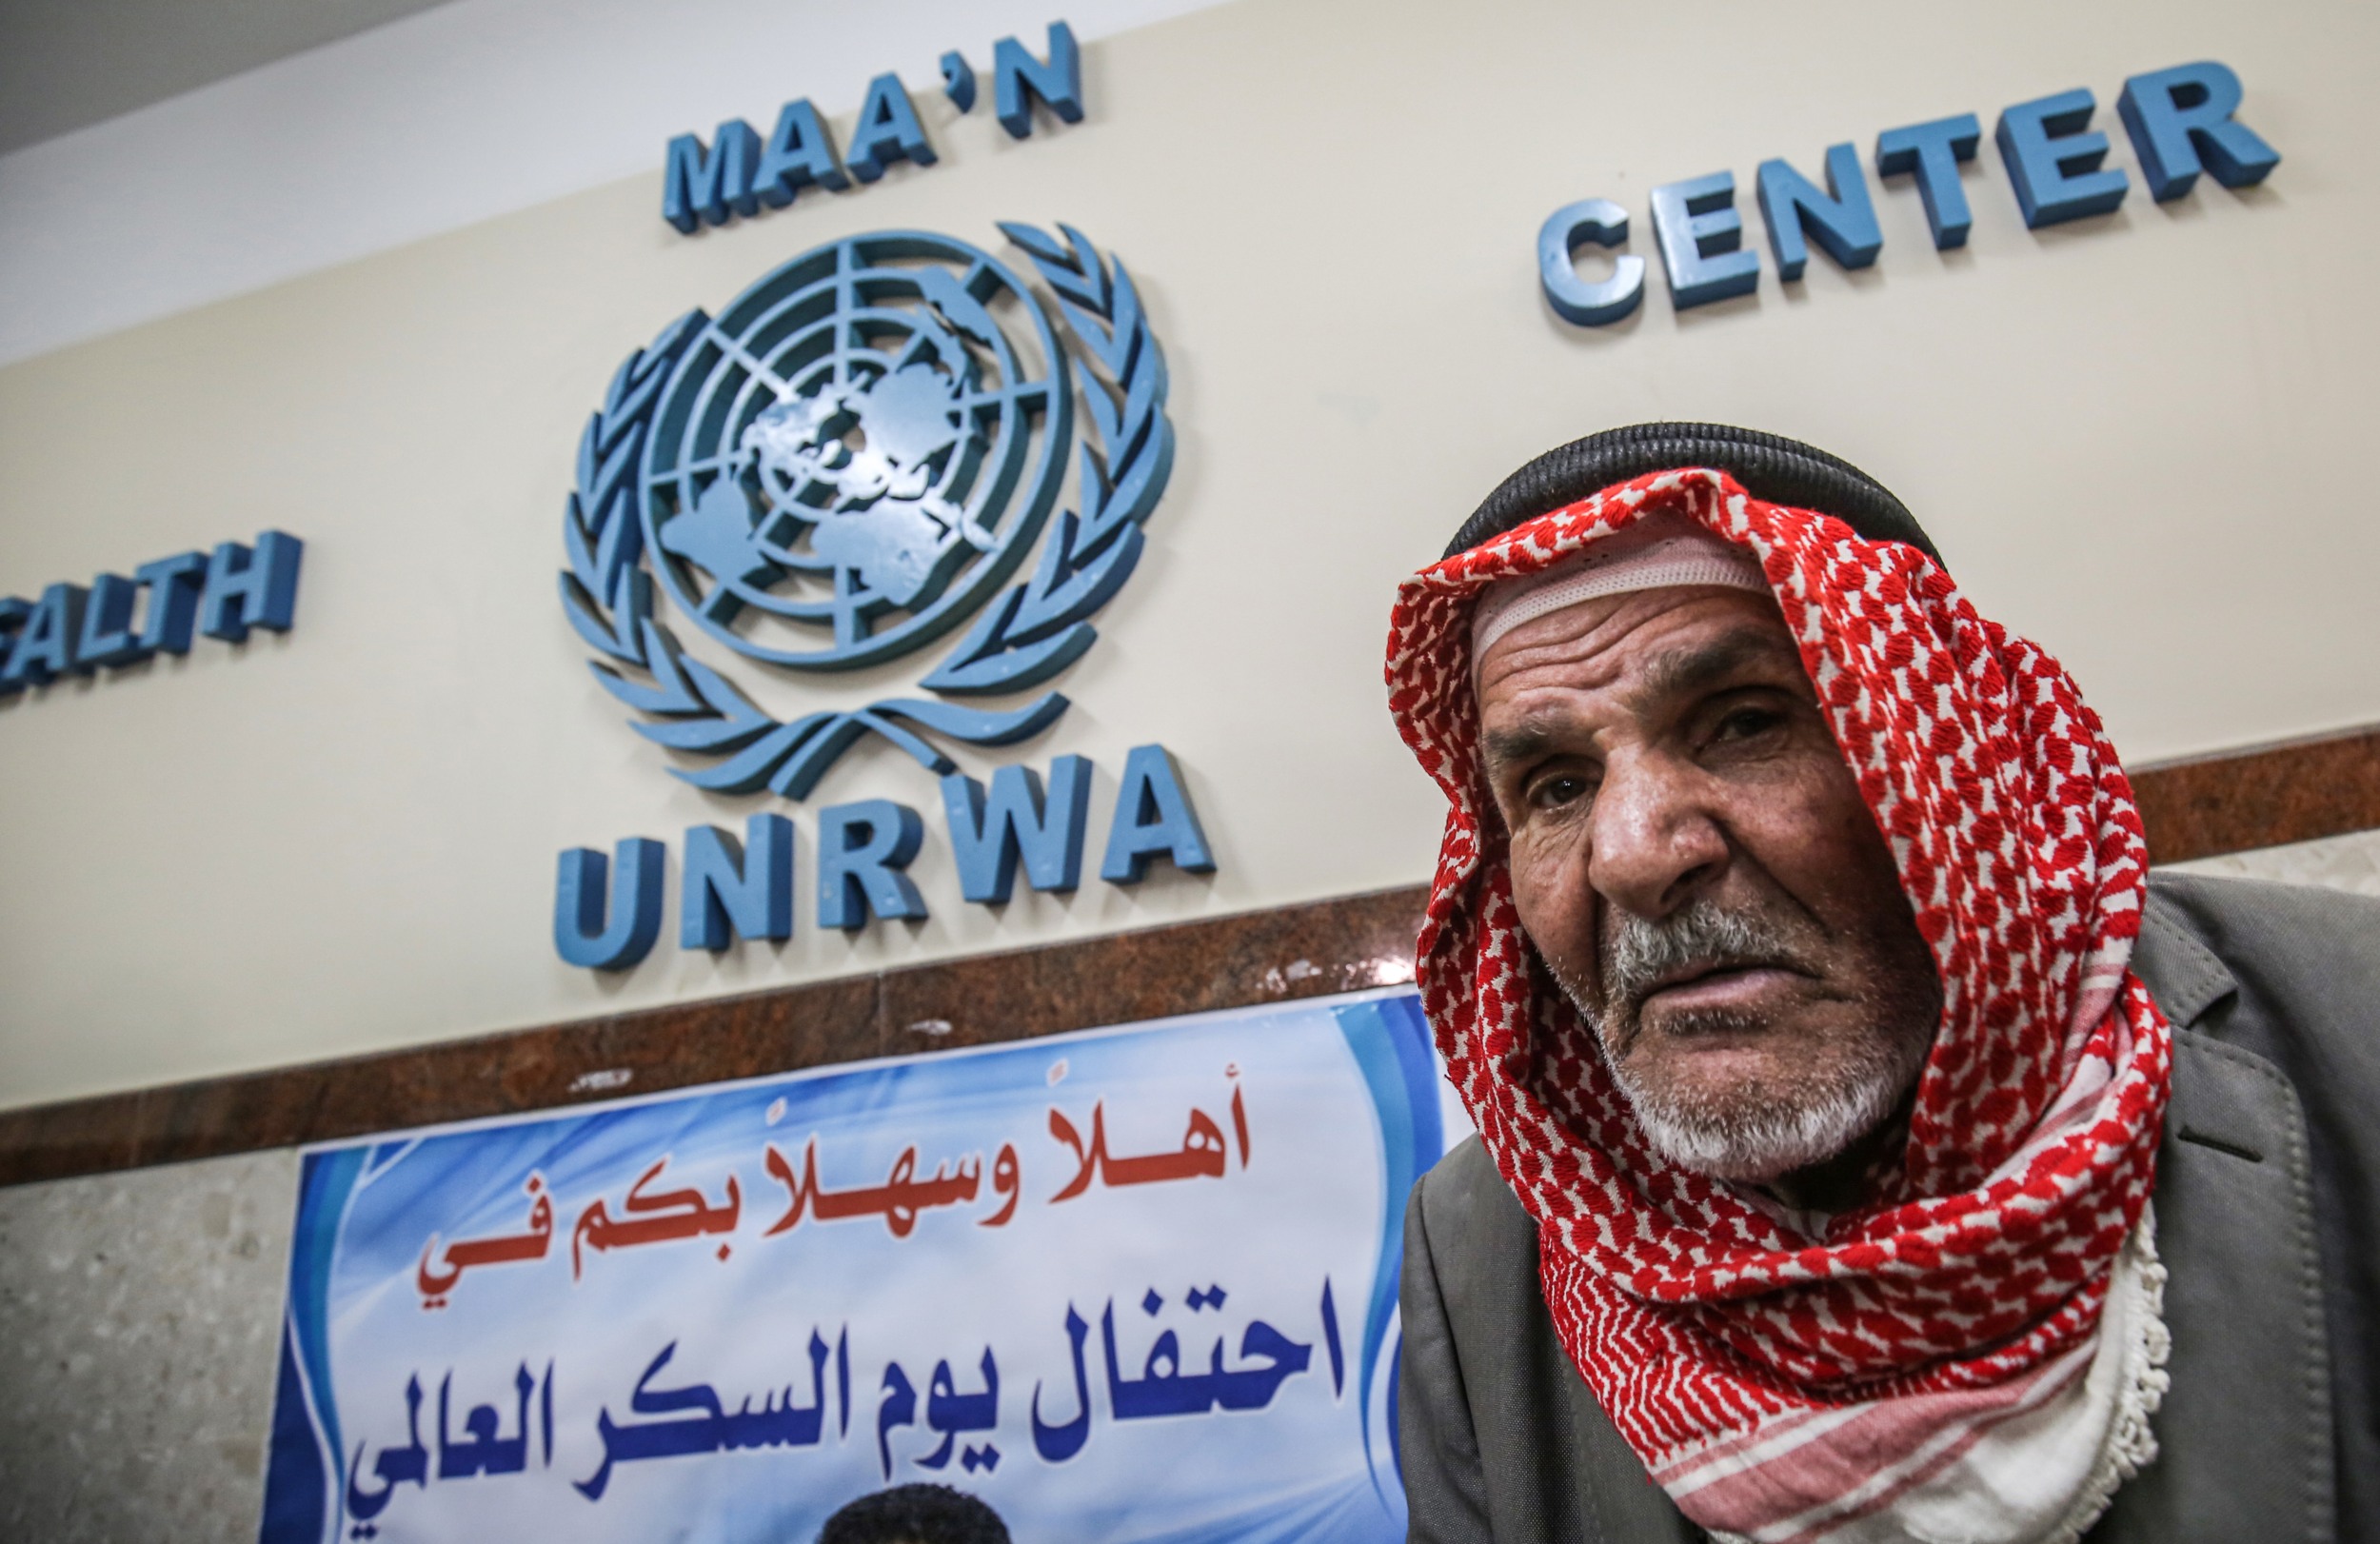 UNRWA provides schooling and medical services to millions of Palestinian refugees in Jordan, Lebanon and Syria as well as the Palestinian territories (AFP)